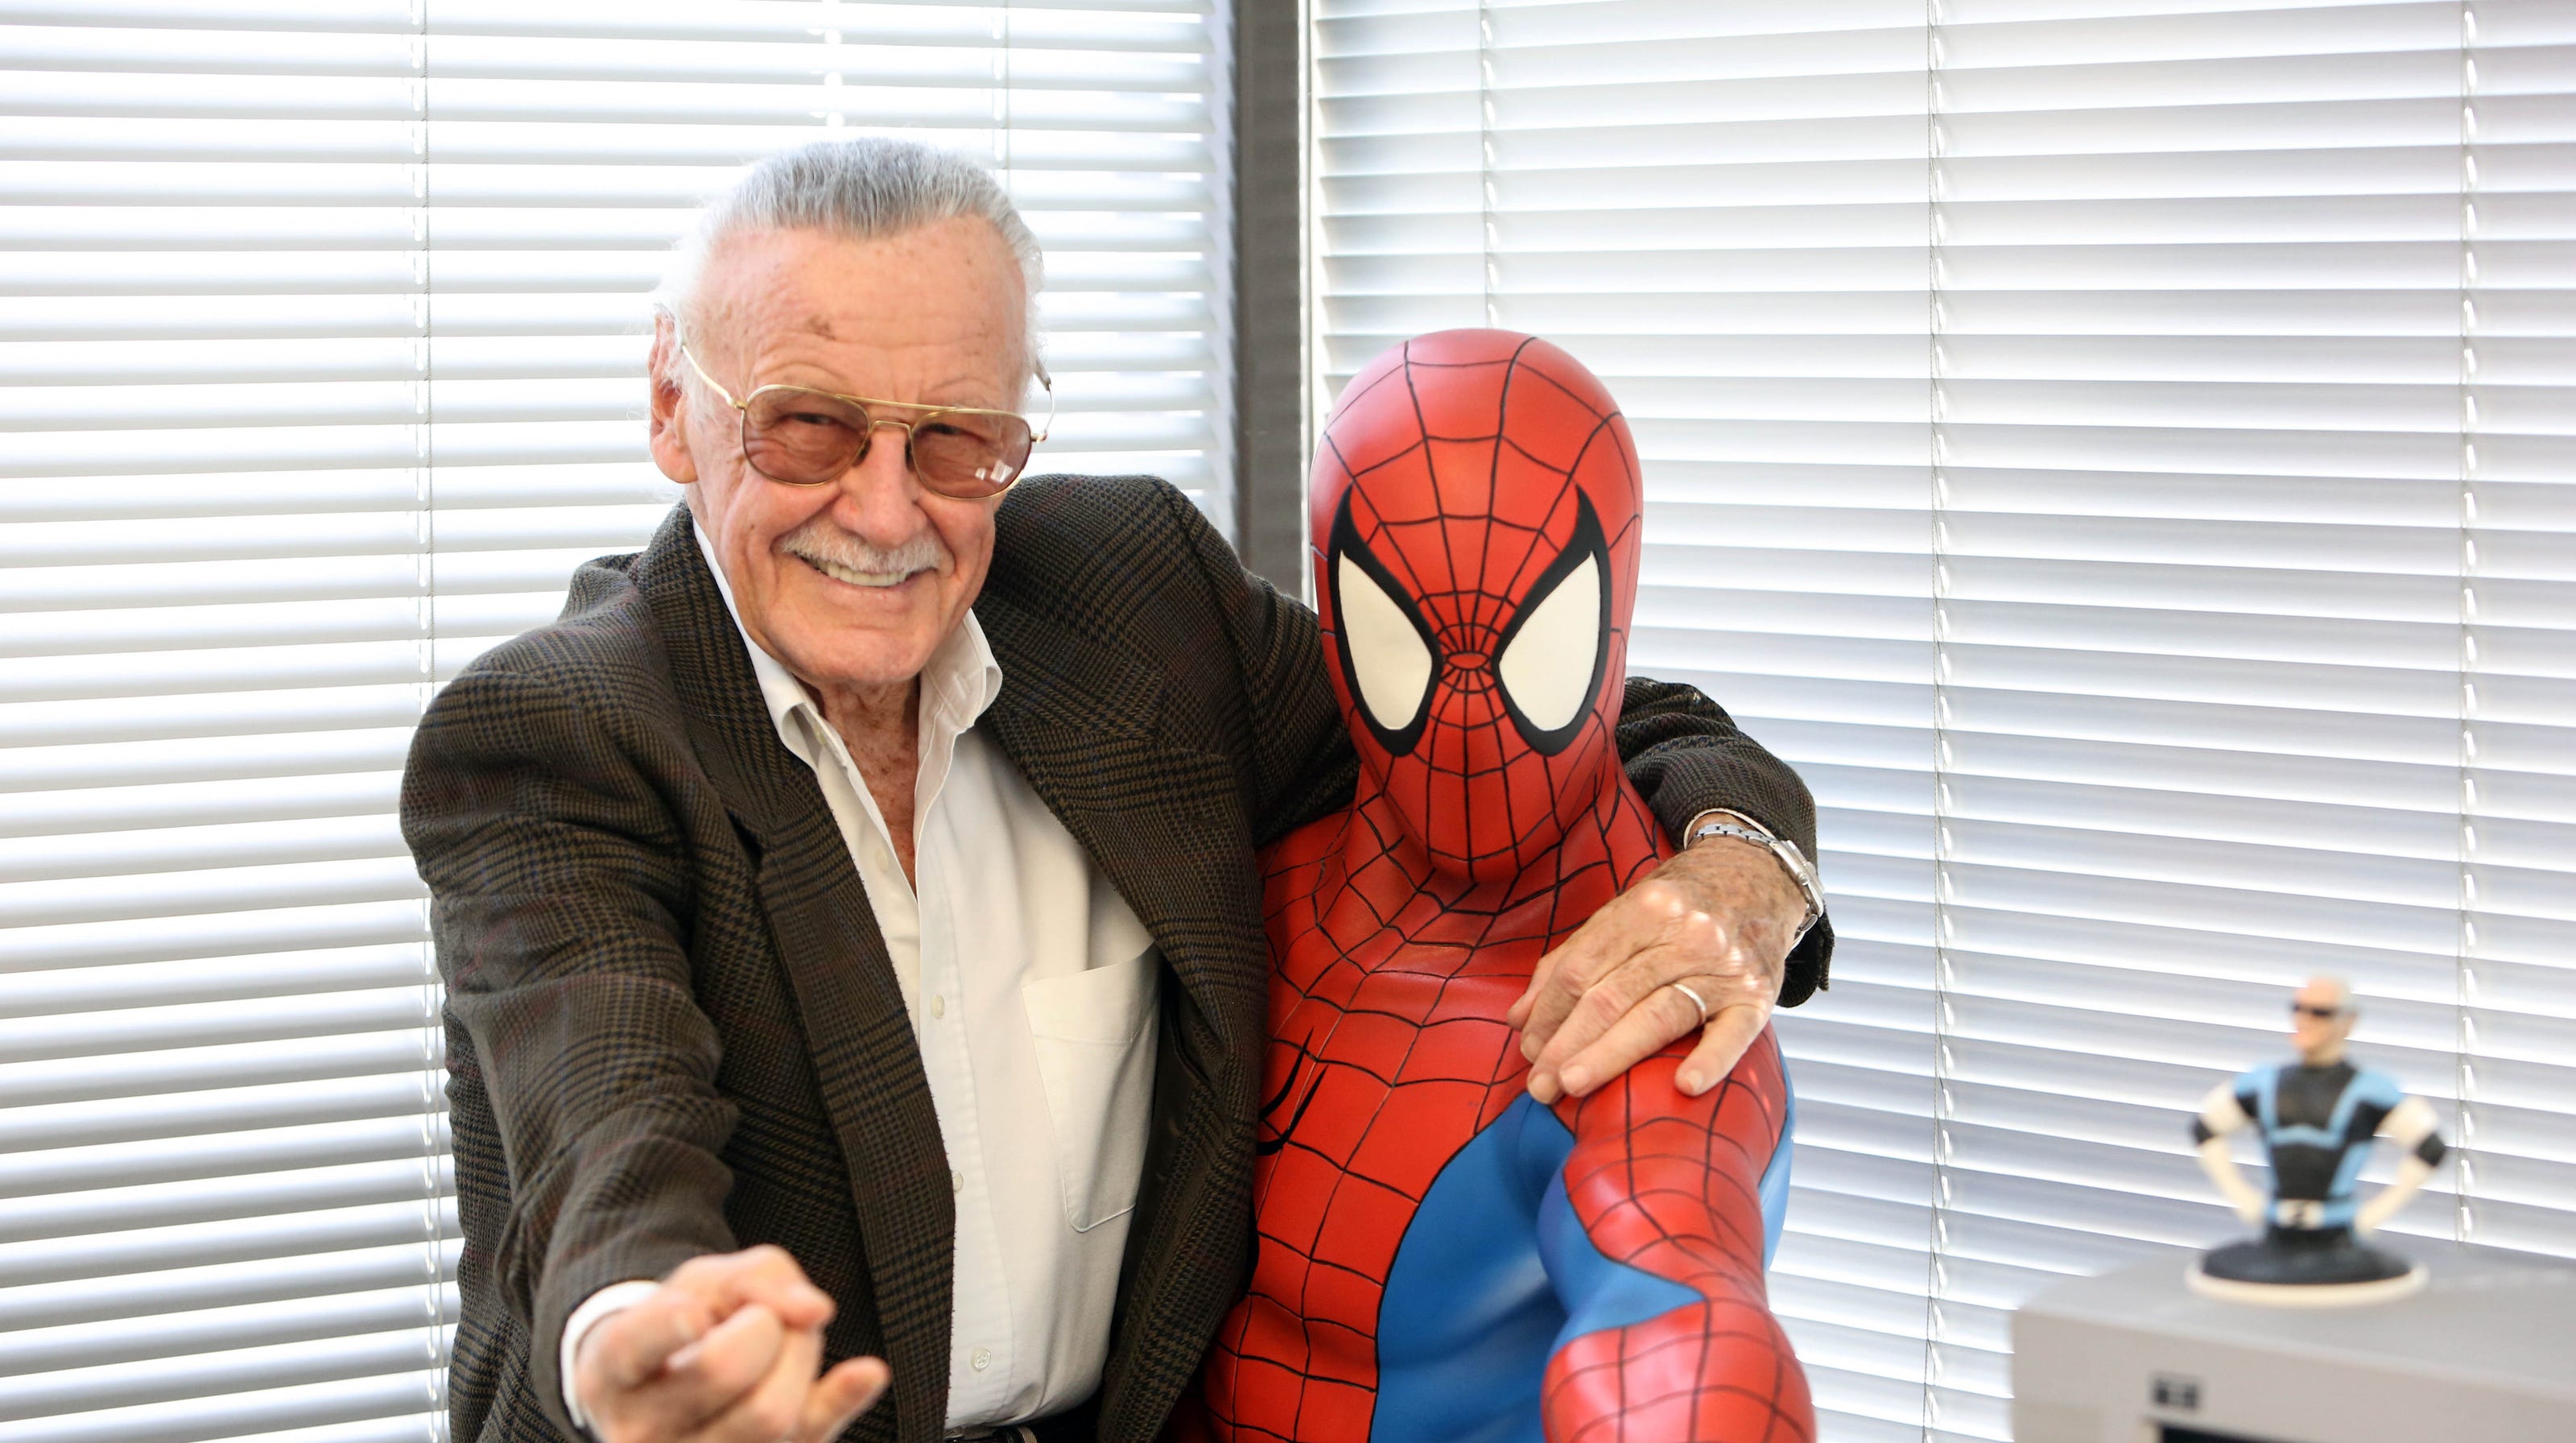 Stan Lee created people who wanted to change the world through heroes